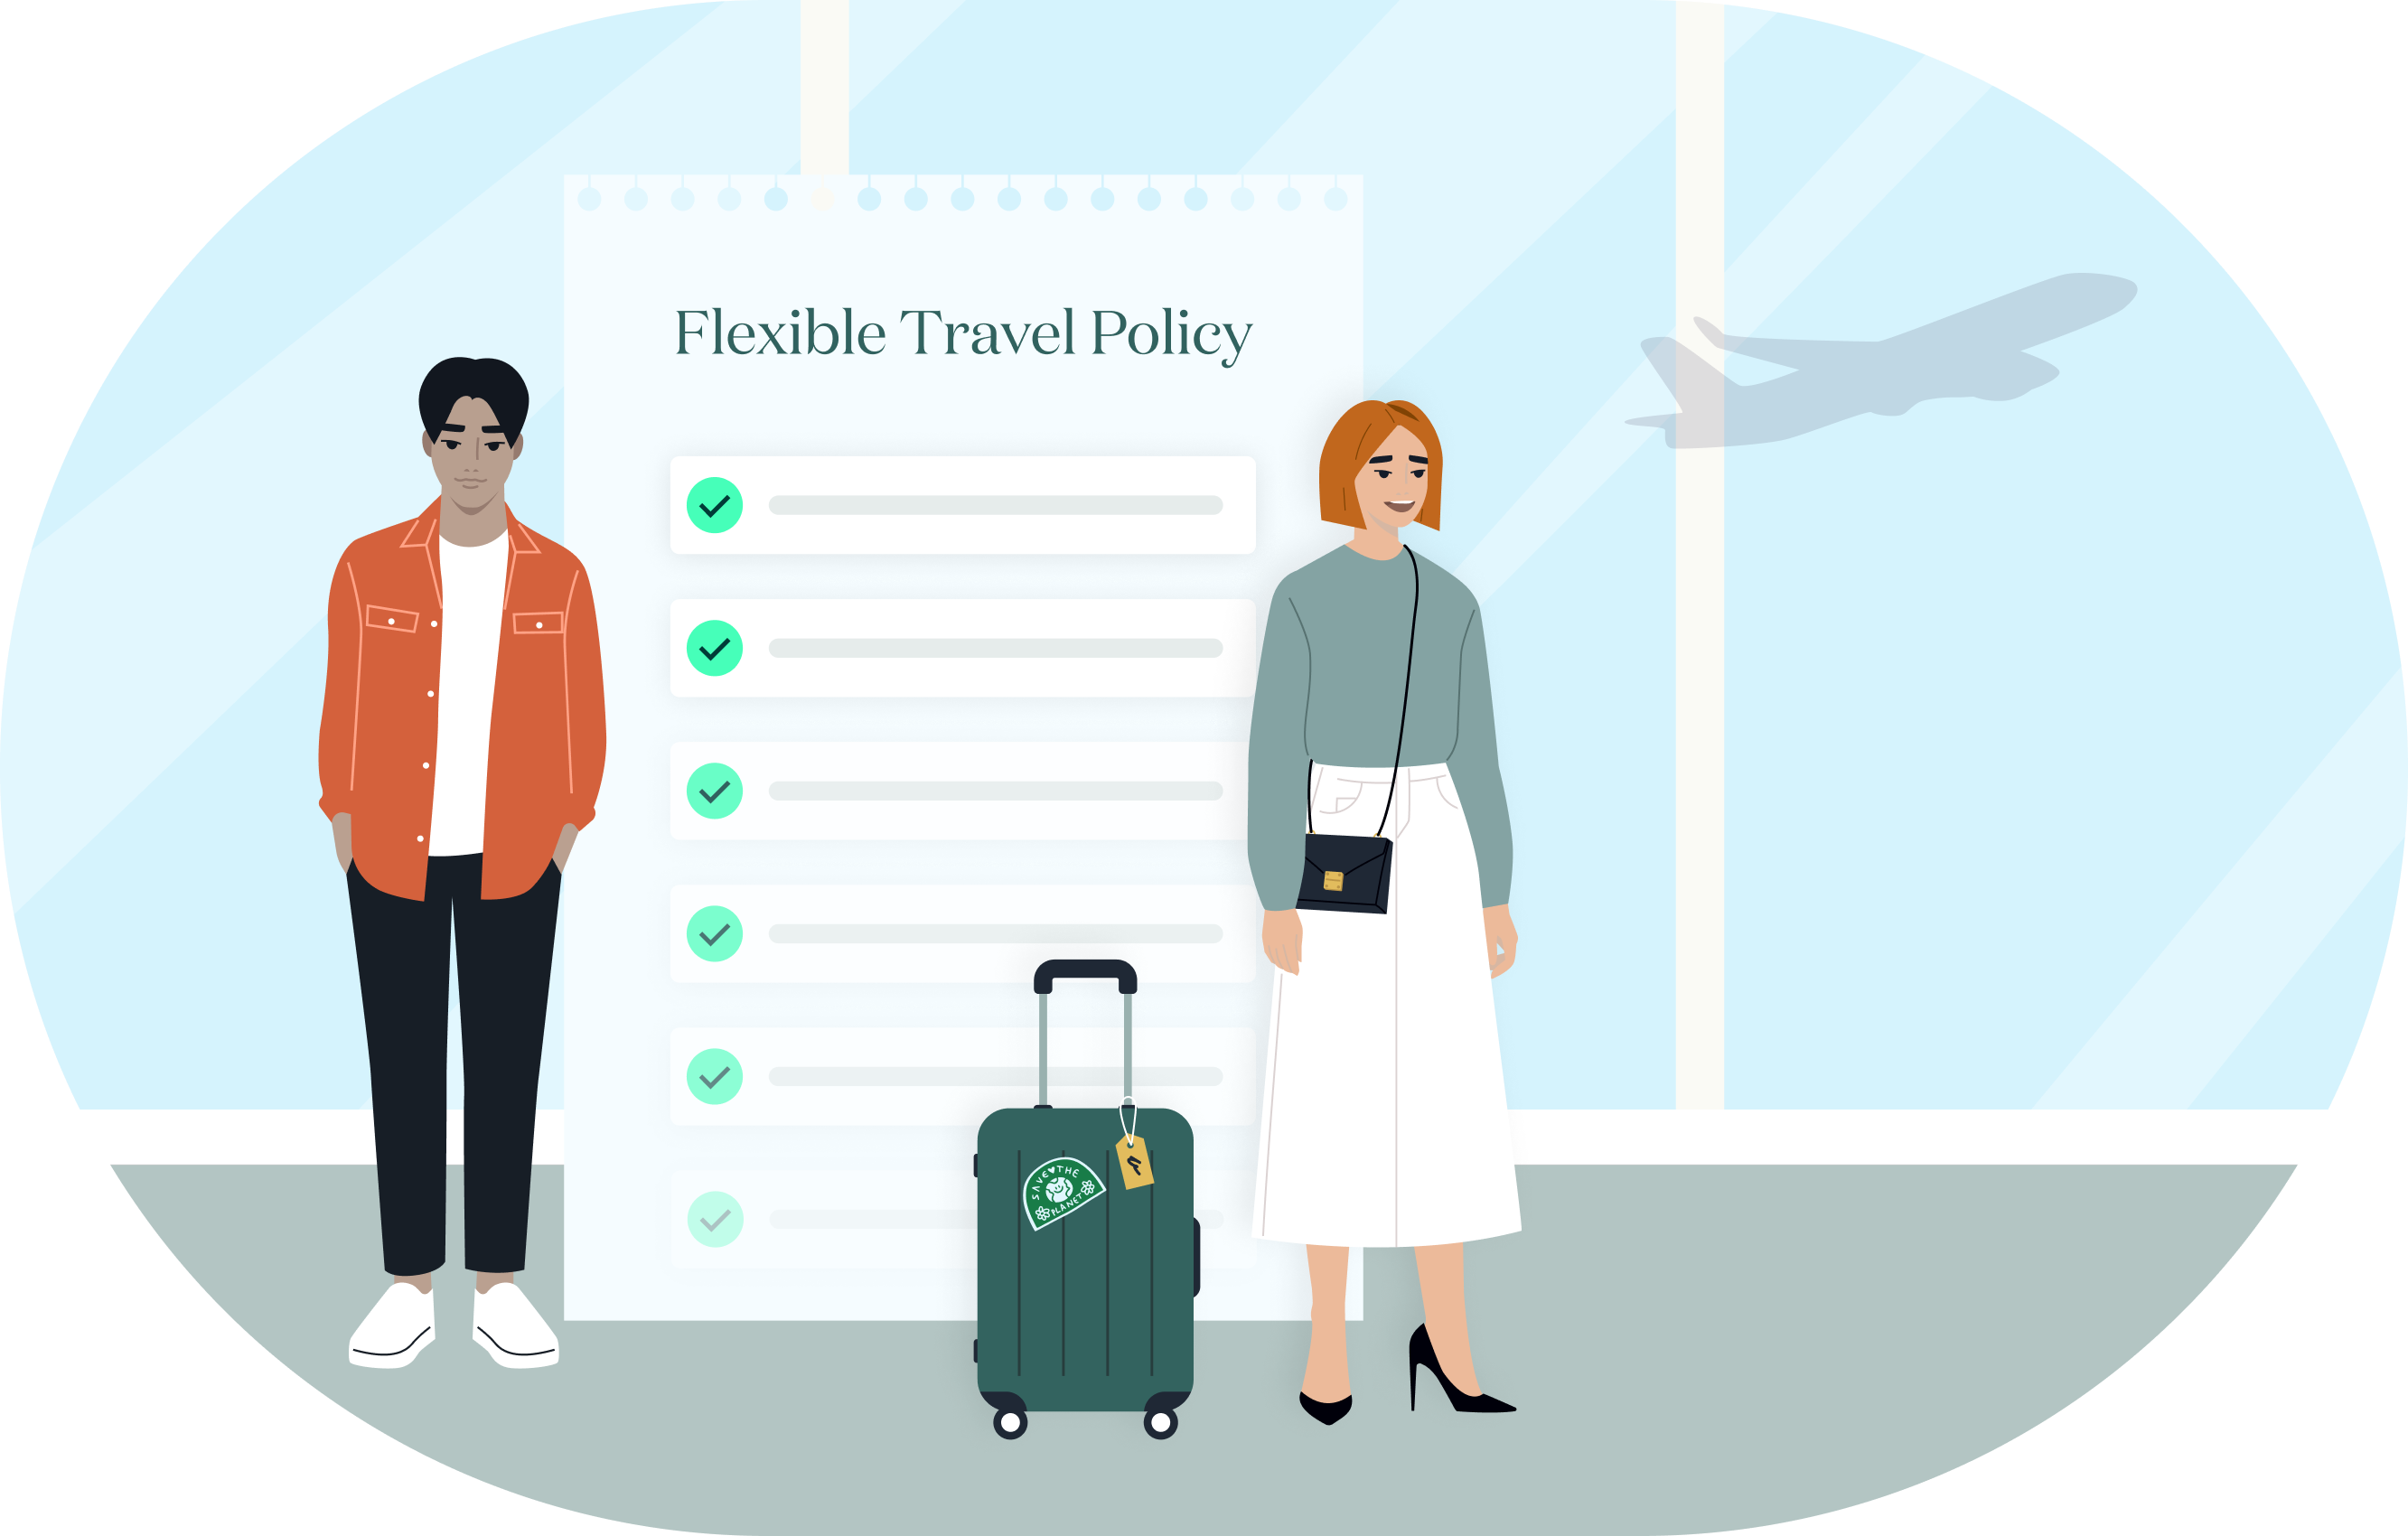 Flexible travel policy